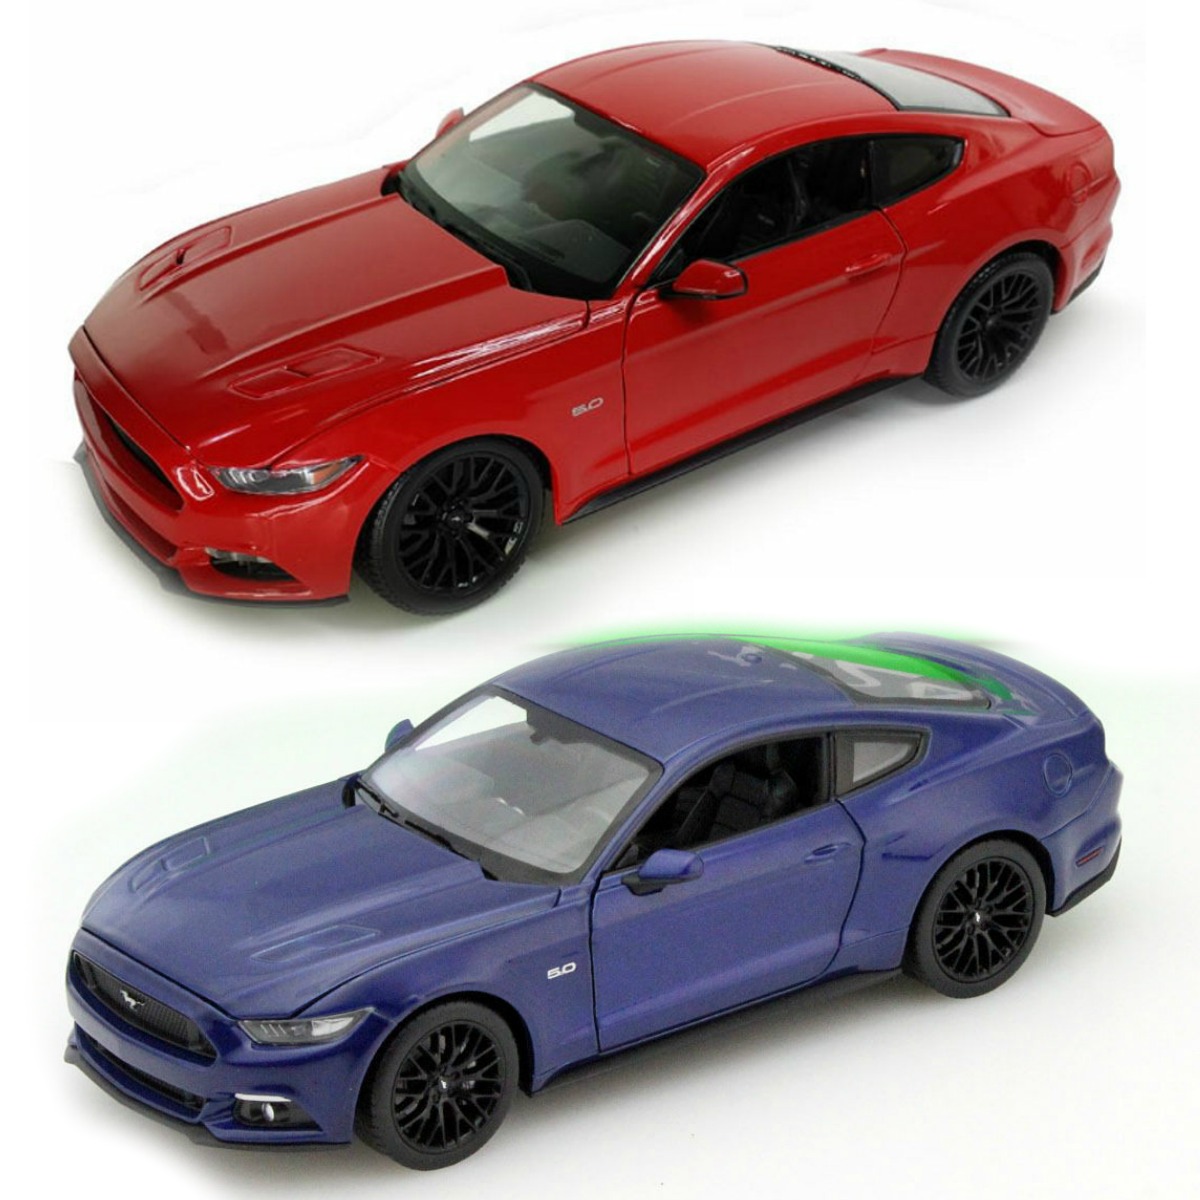 Ford Mustang 1/18 - Voiture-miniature.com